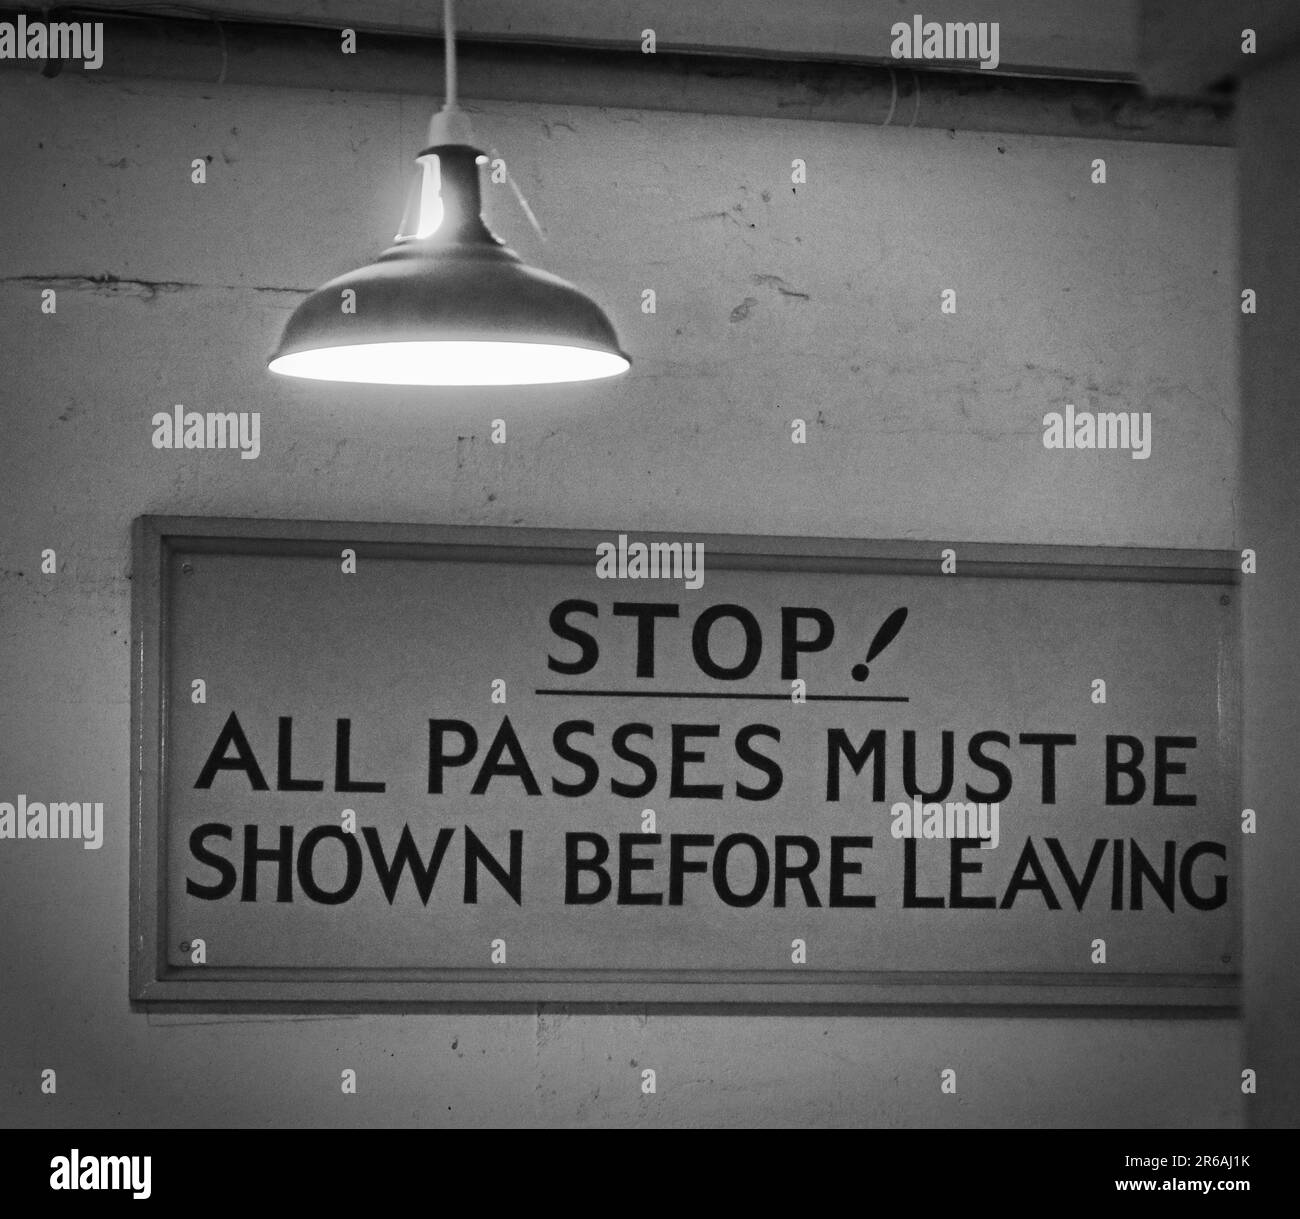 Security and keeping things secure - Stop - All passes must be shown, before leaving ! Stock Photo